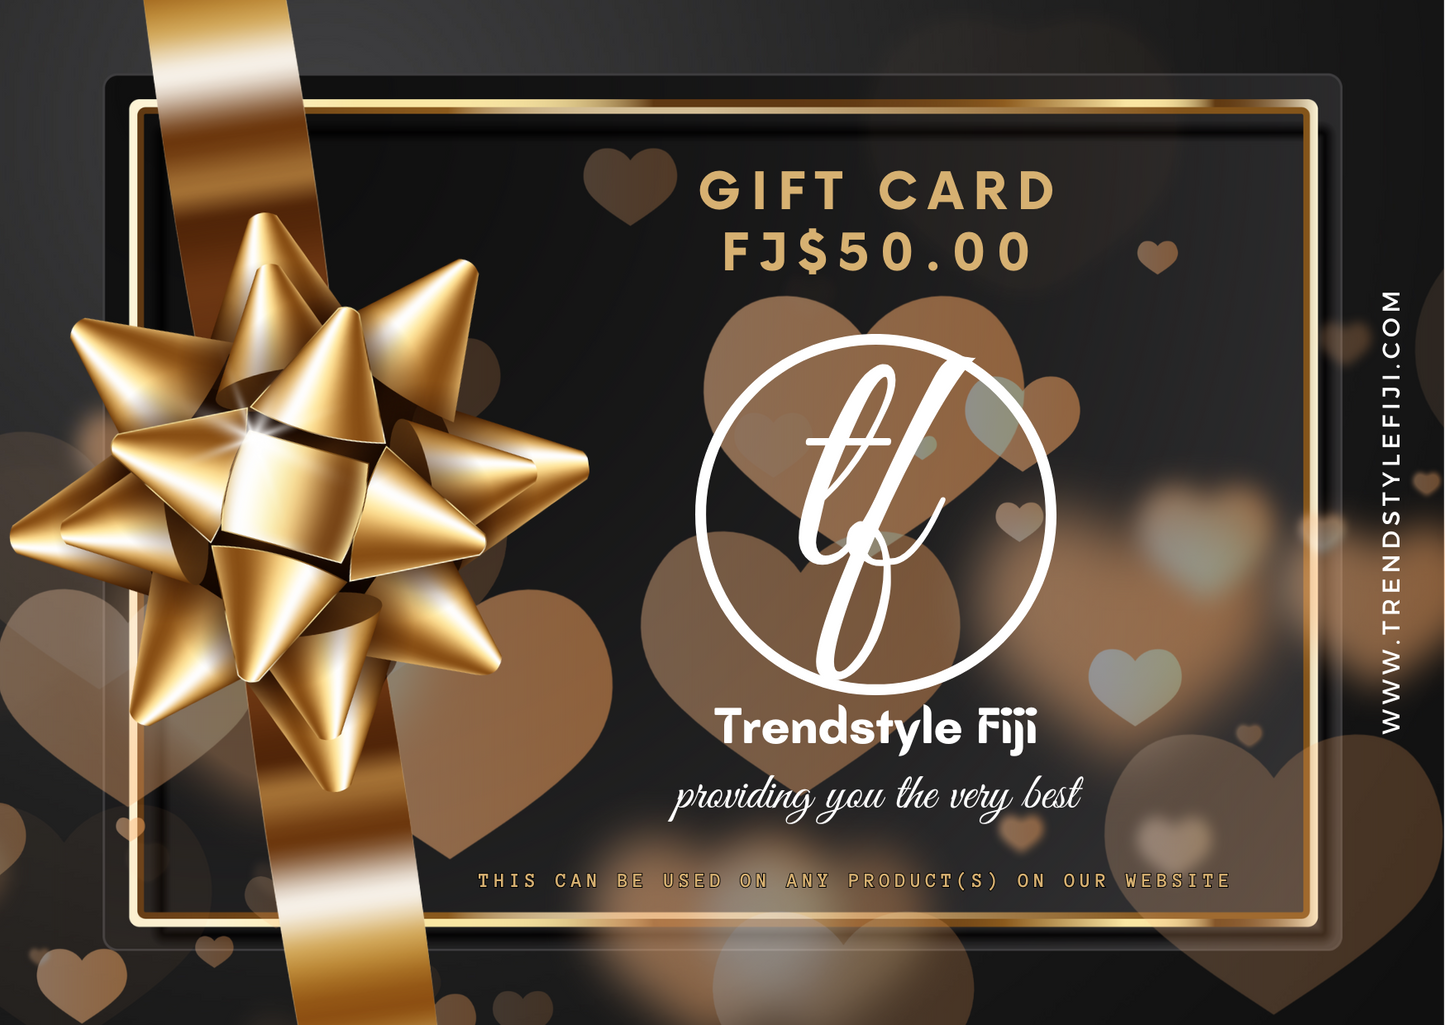 Trendstyle Gift Card